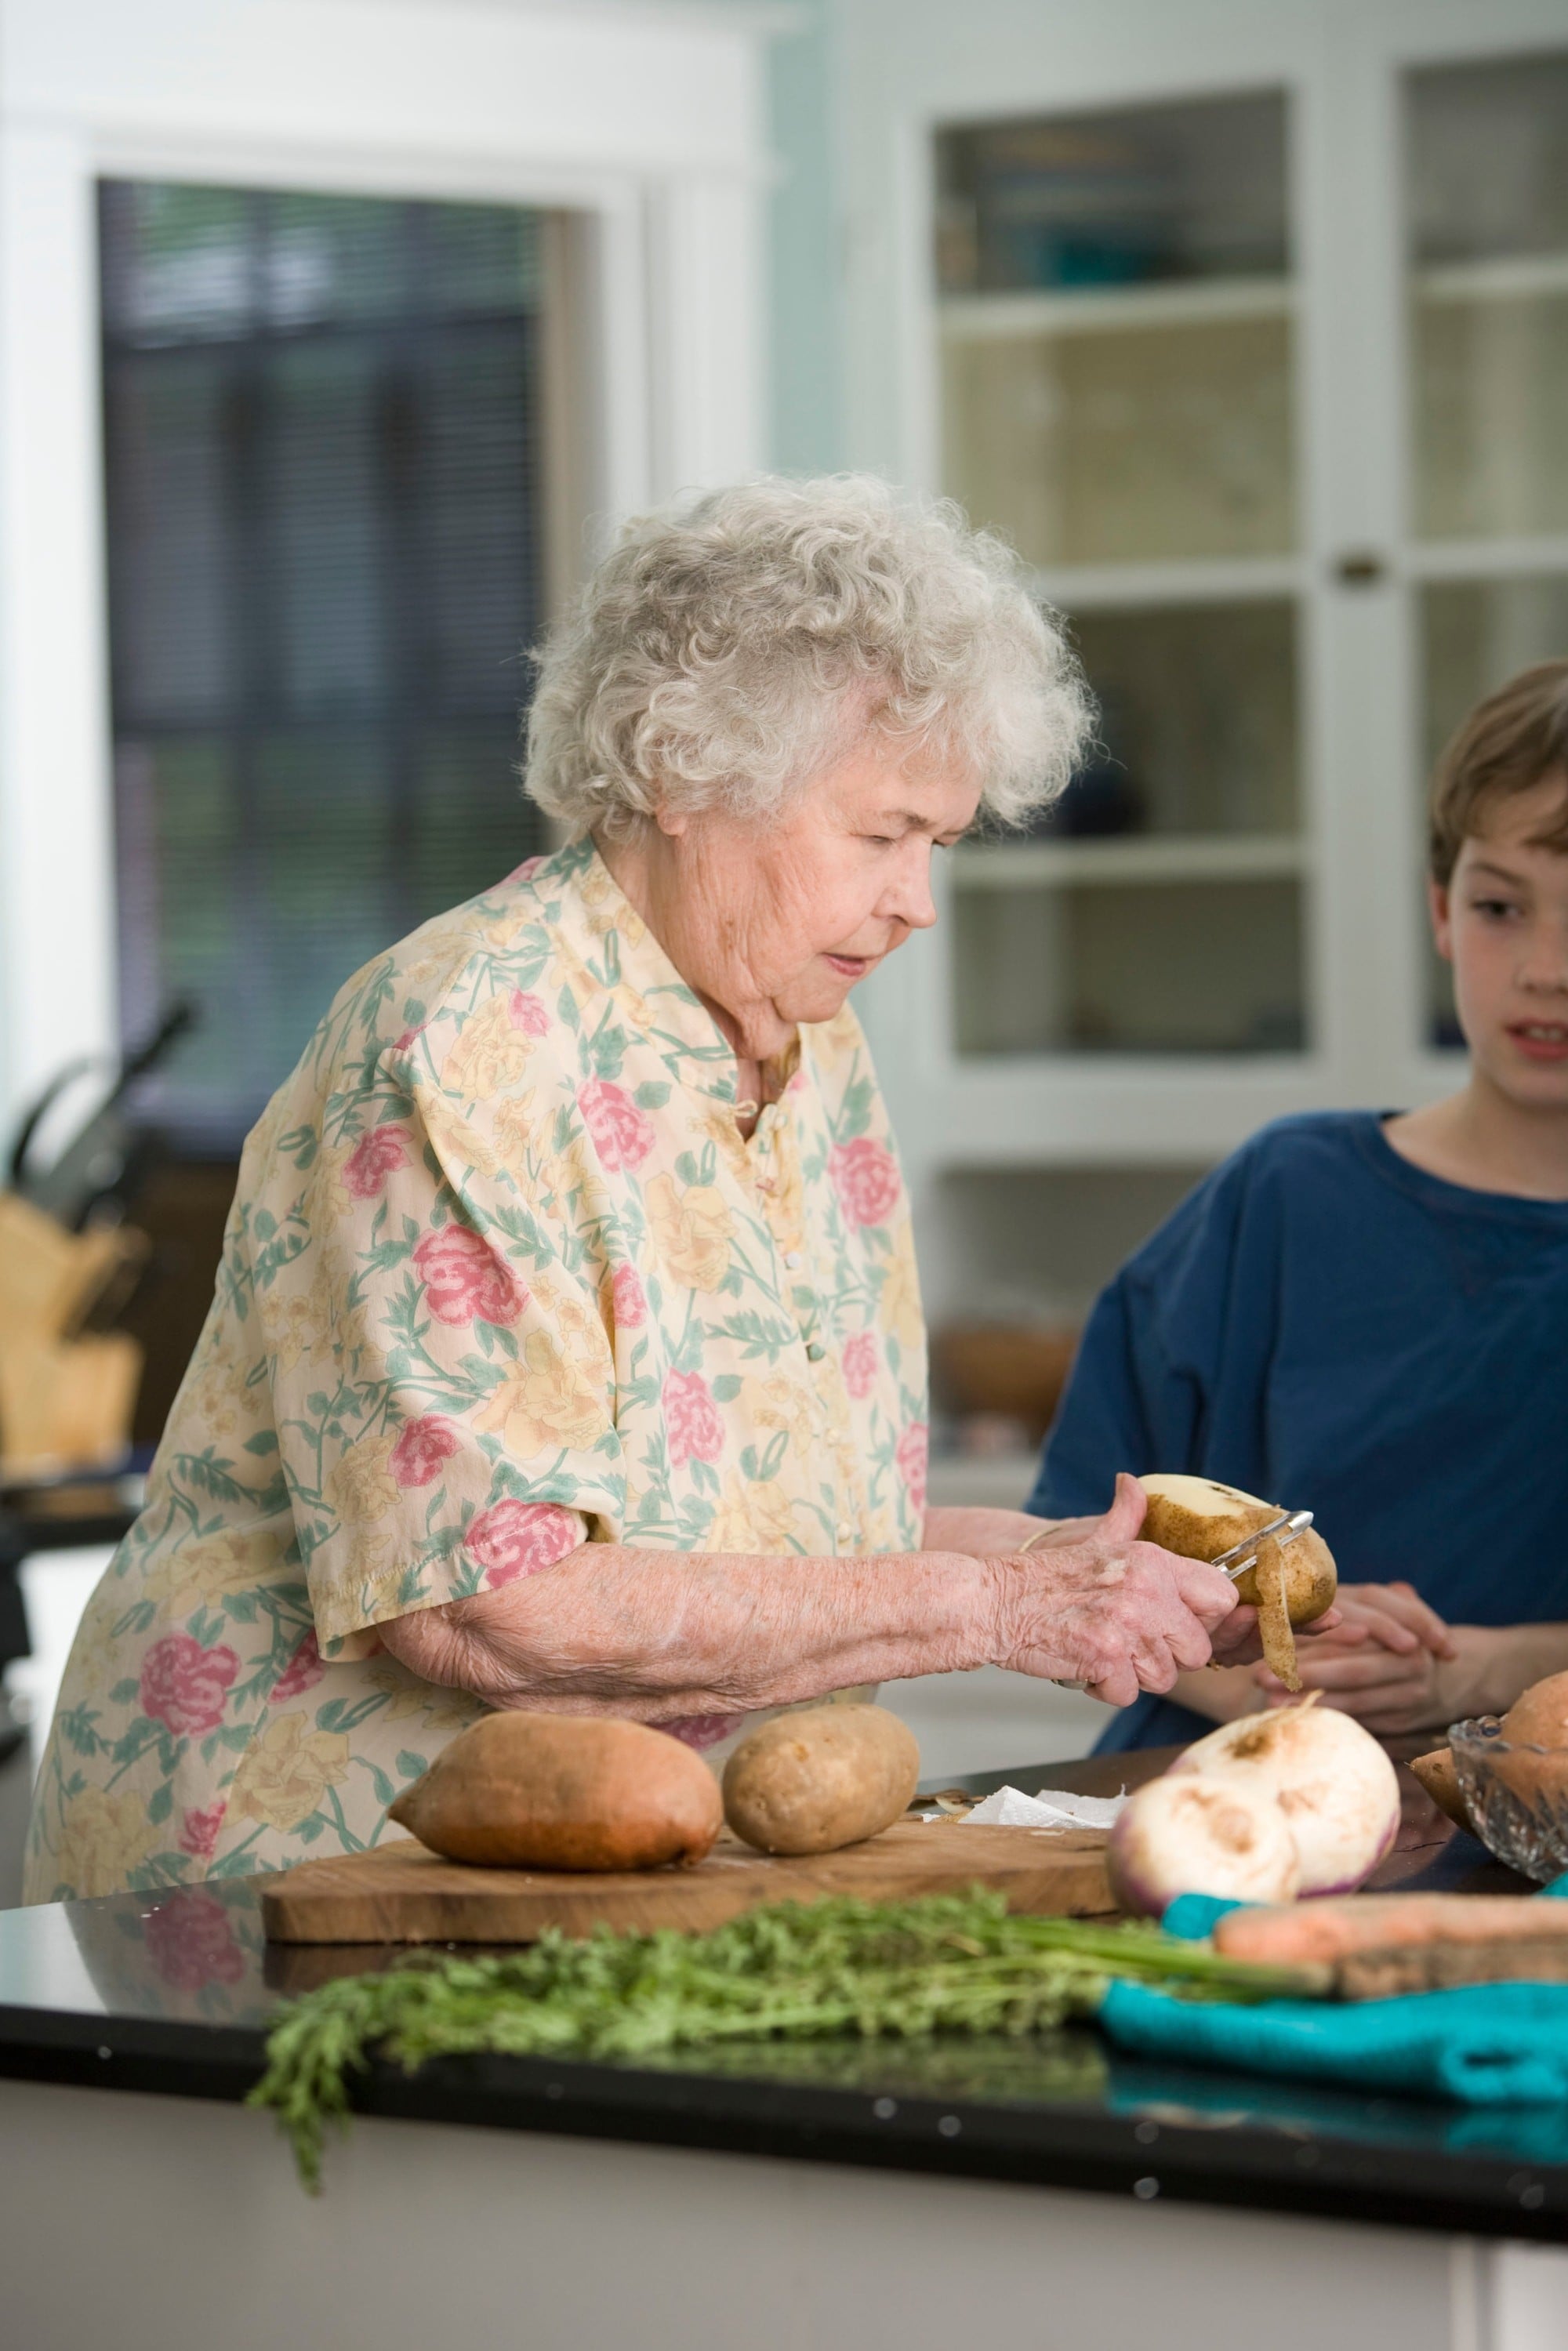 Elderly woman preparing food with assistance